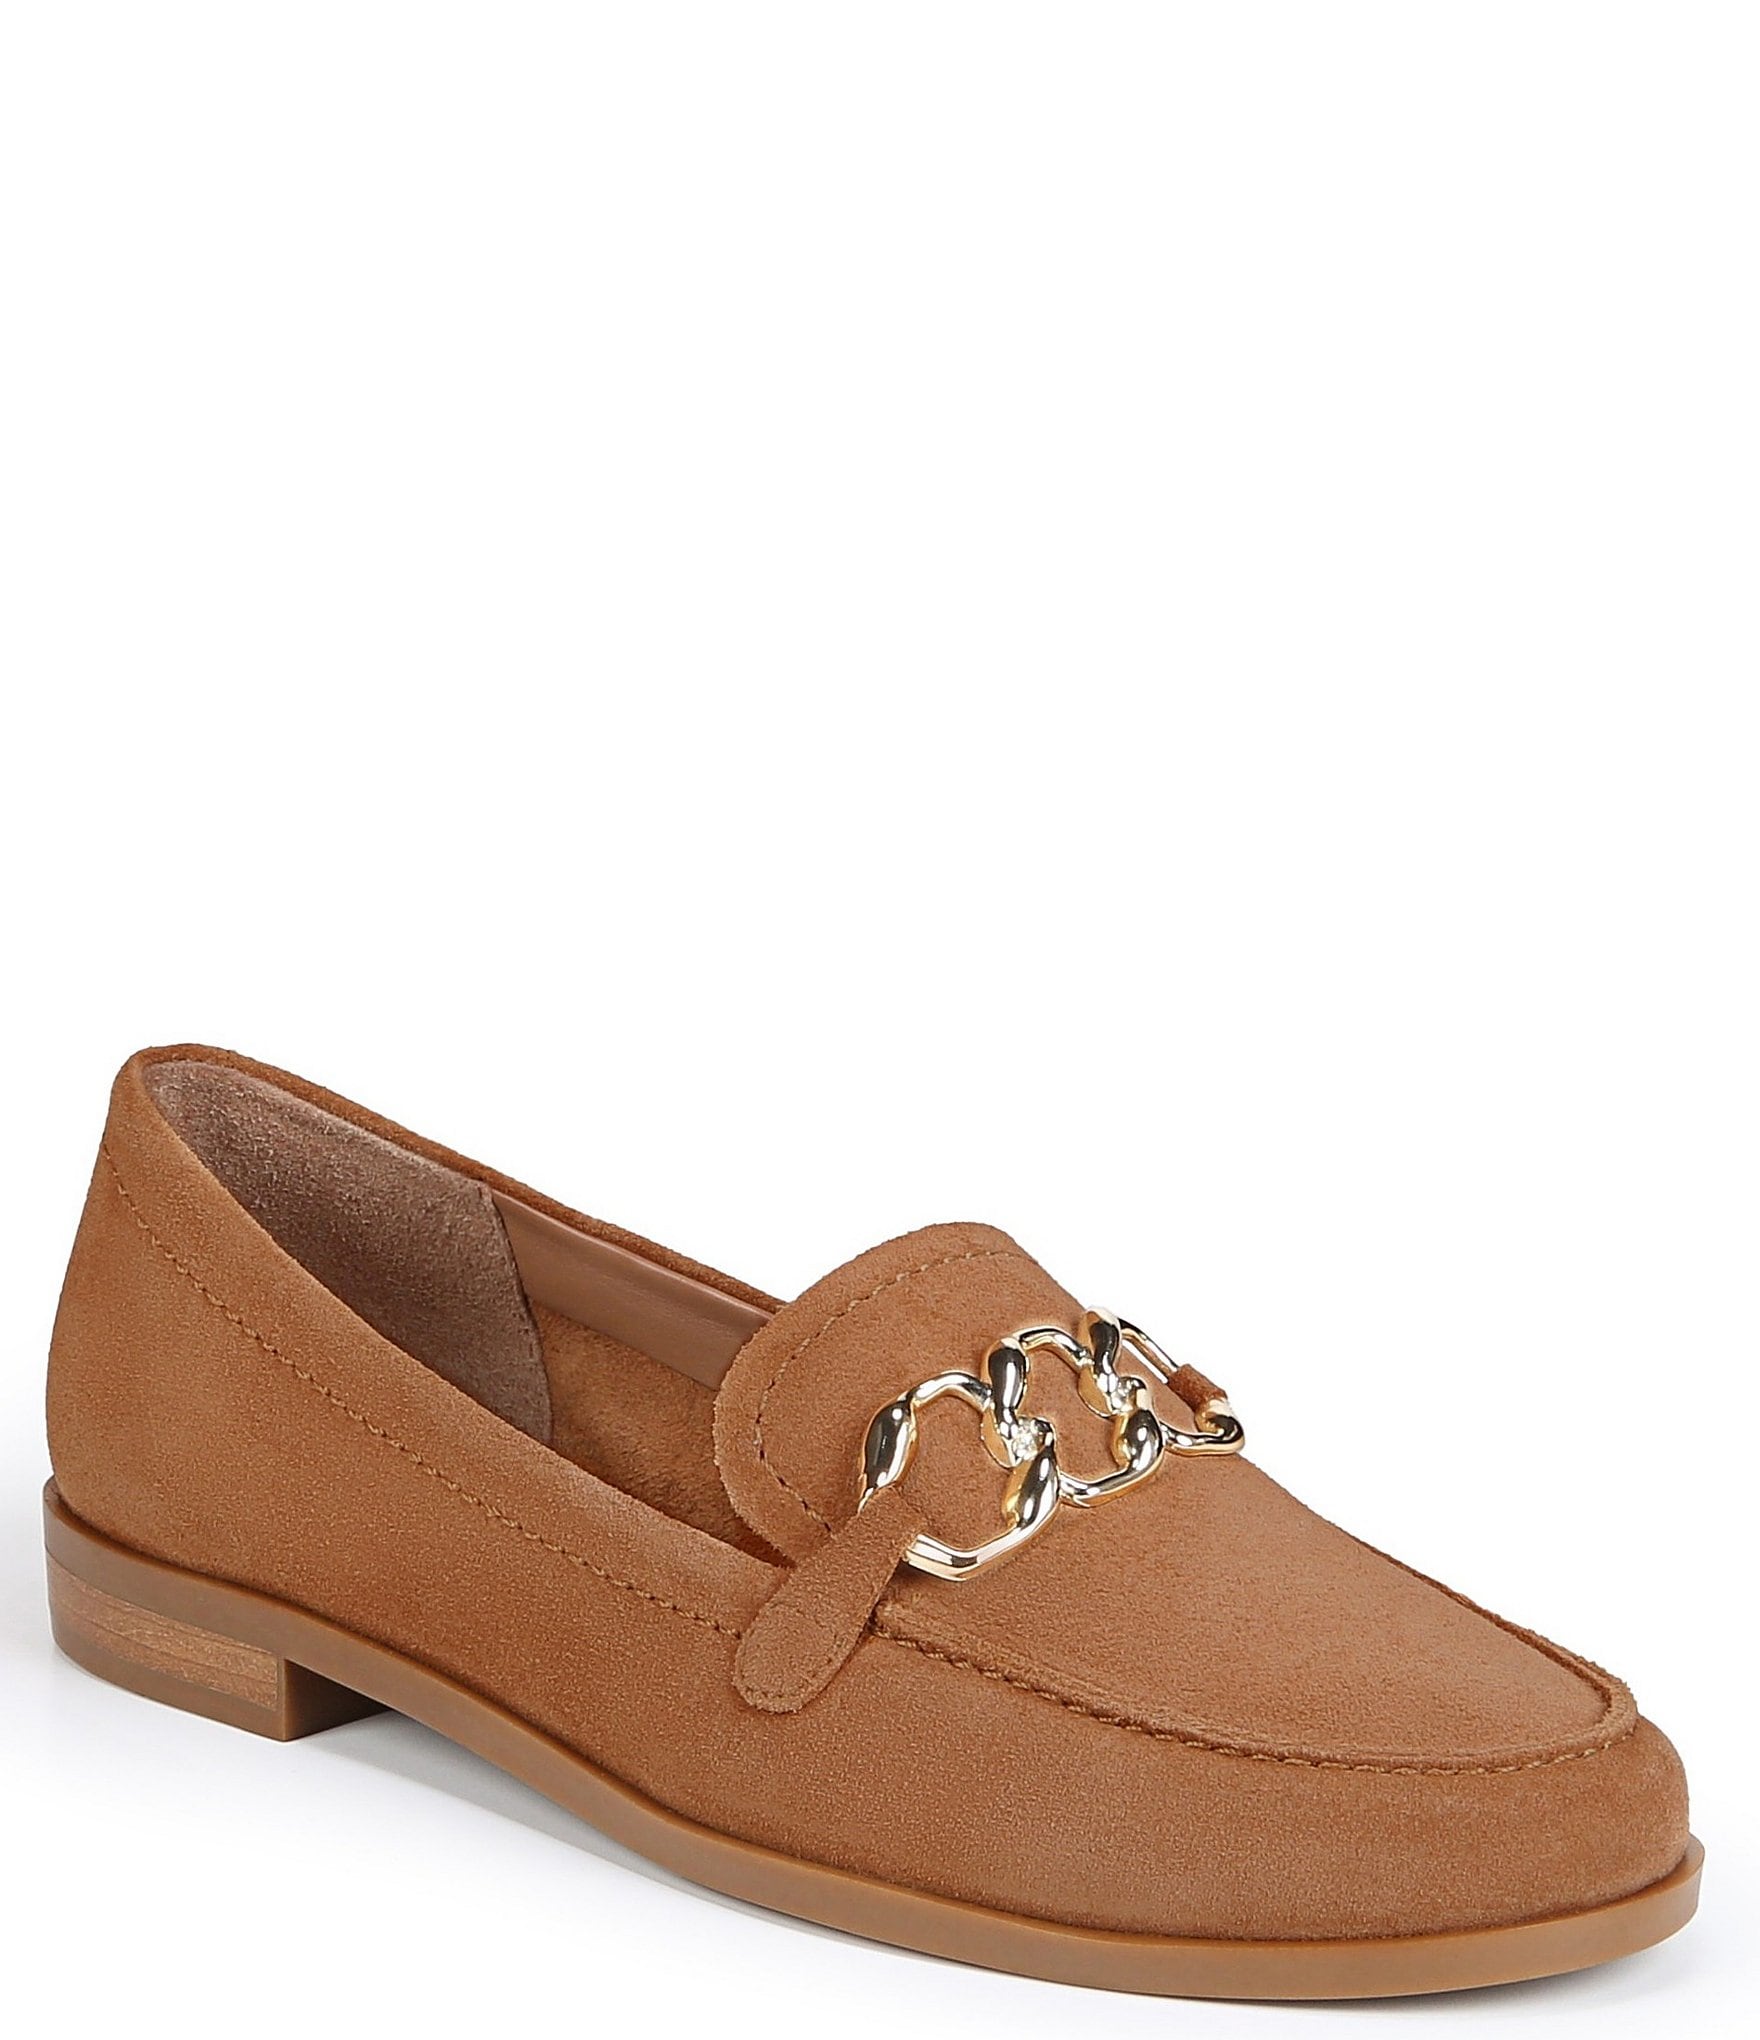 Eviternity by The Jacket Maker Baxton Suede Leather Loafers